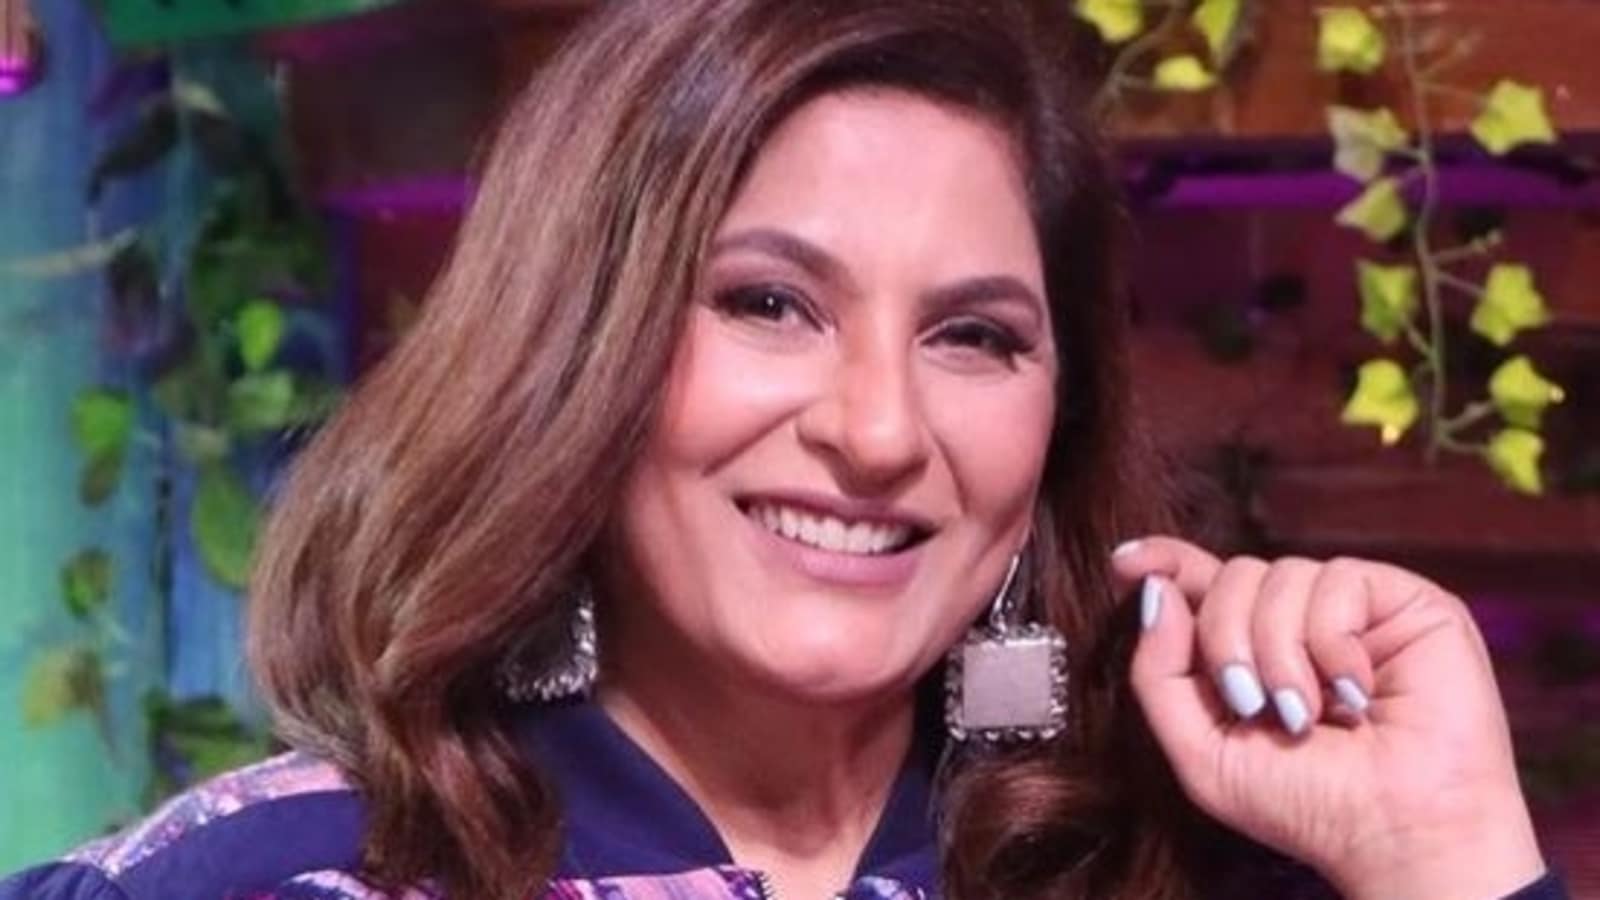 Archana Puran Singh’s co-star criticised her comedy skills: ‘After that I couldn’t do comedy for a long time’